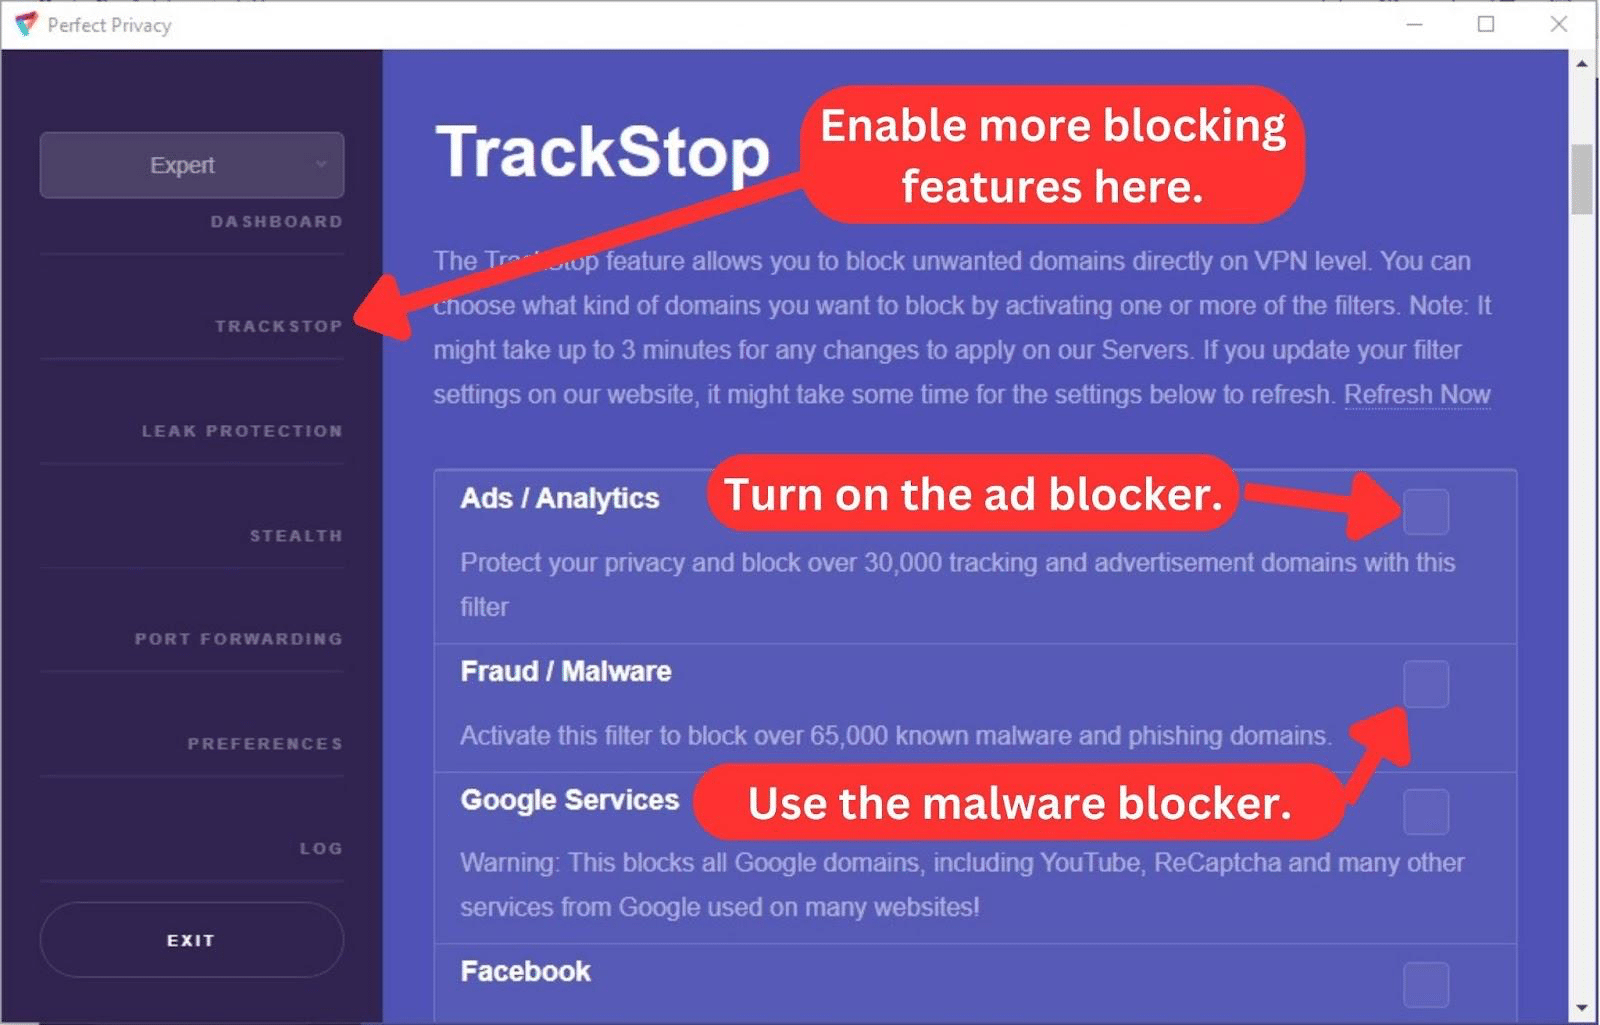 Perfect Privacy TrackStop feature via Expert mode